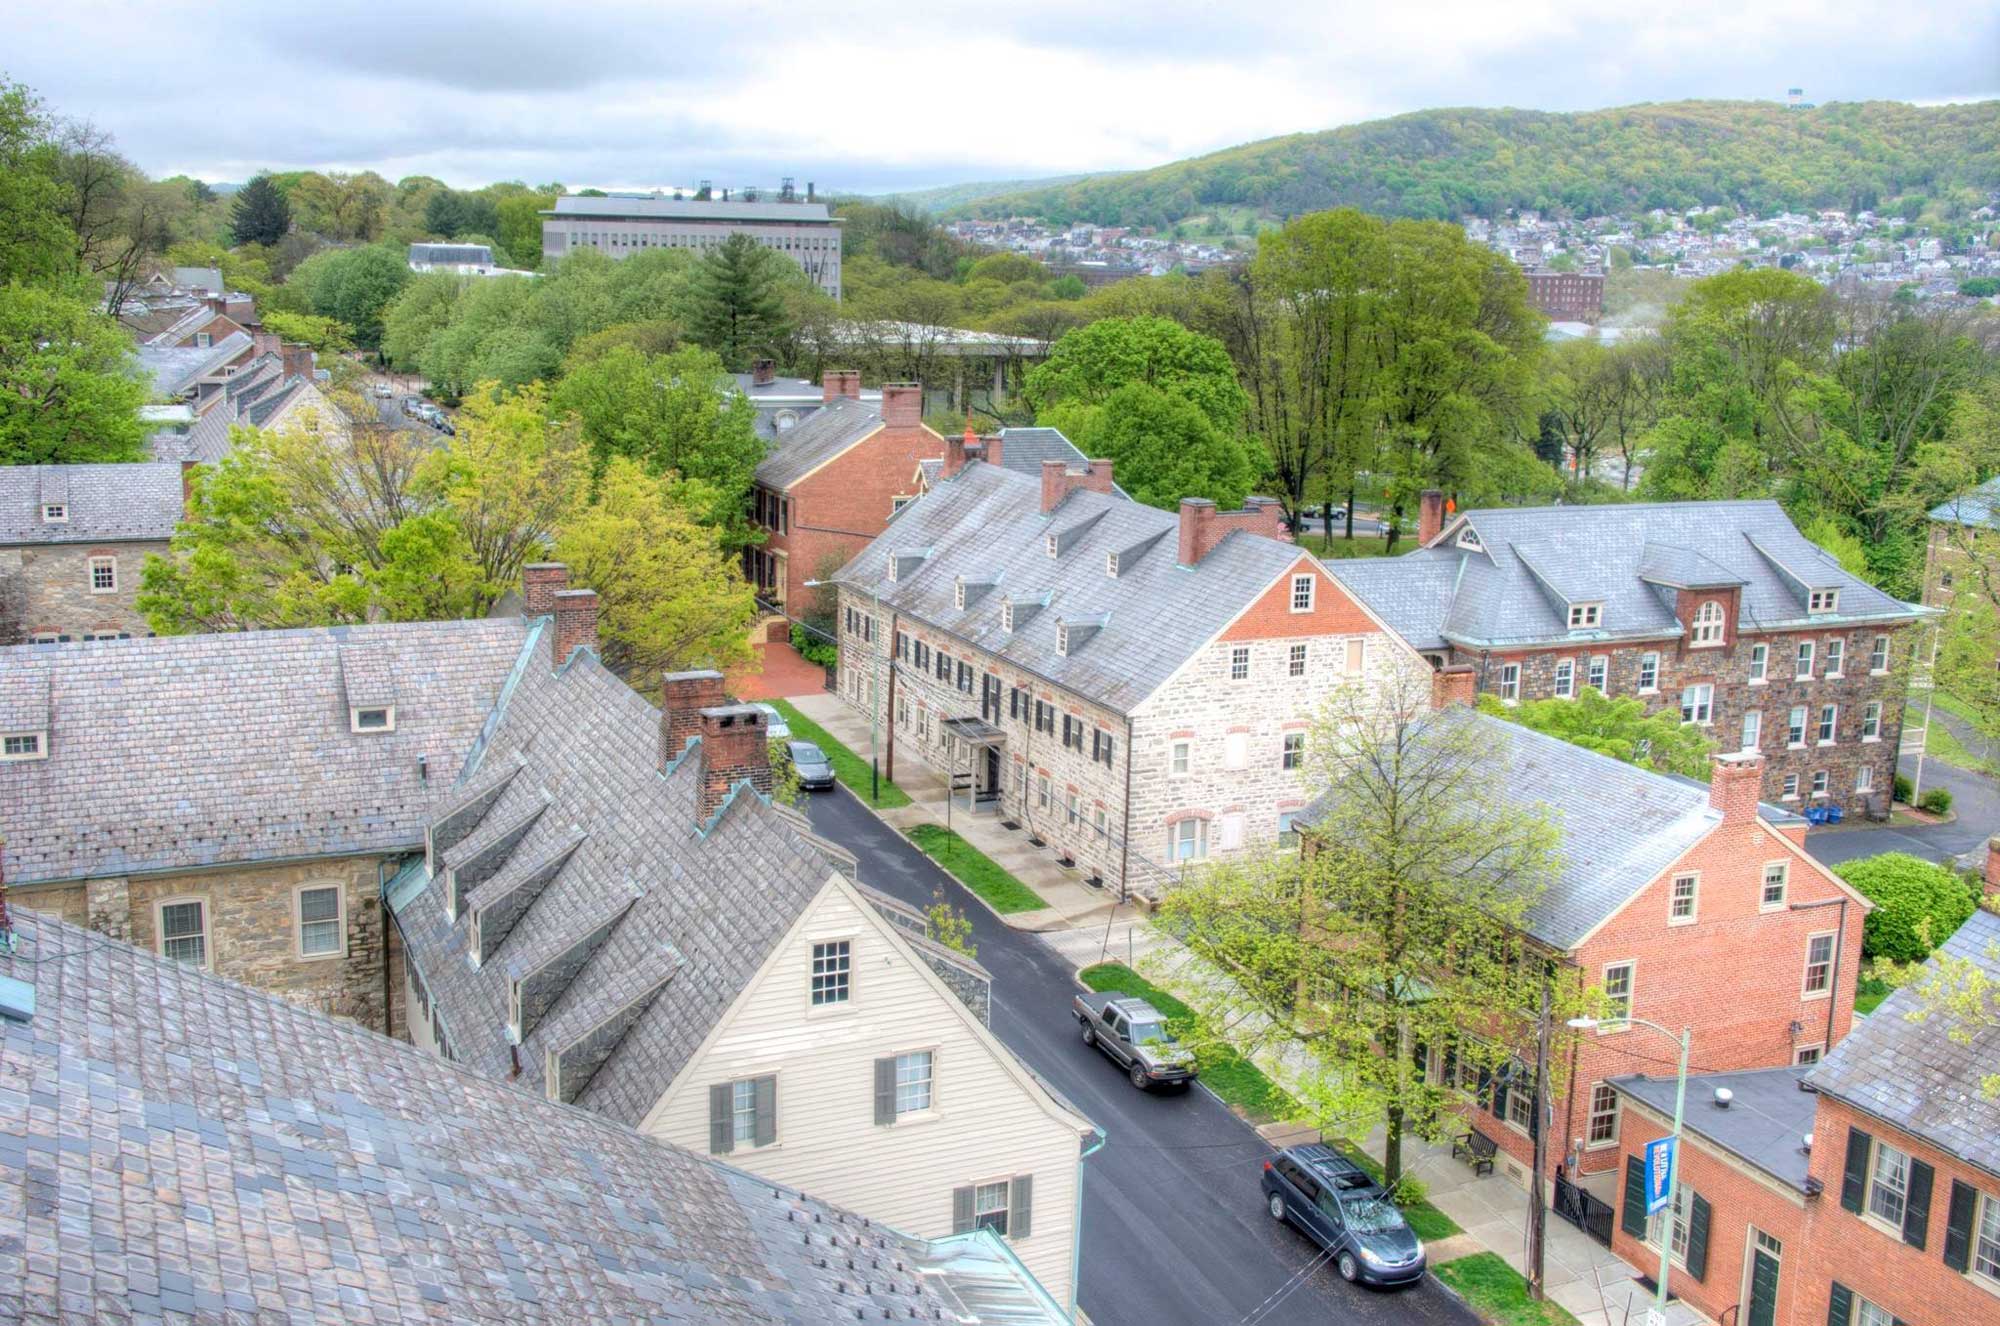 Photograph of a historic area of Bethlehem, Pennsylvania, take from a high point. The photo shows old brick buildings along a paved street, with tree-covered hills and more buildings in the background.